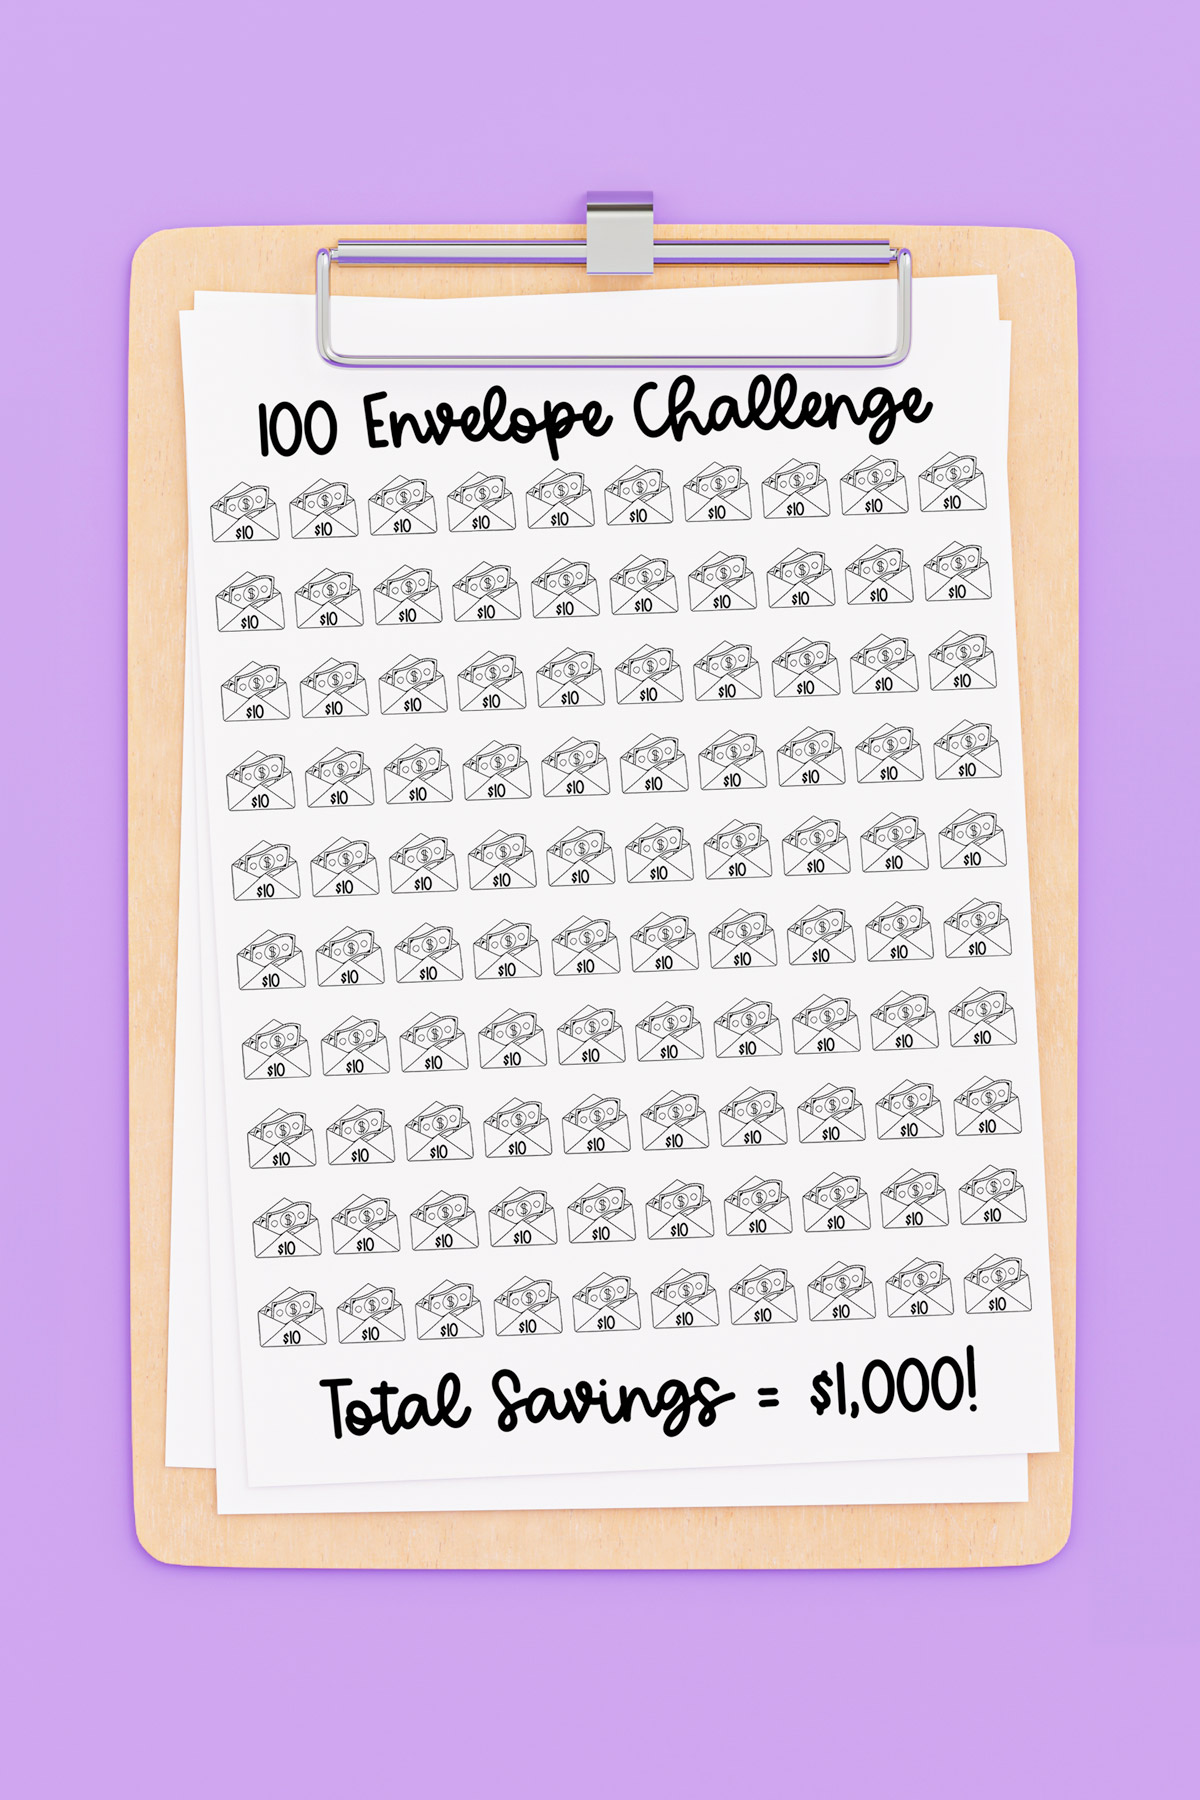 This image is showing an example of a free 100 envelope challenge chart printable you can get at the end of this post. This one is for saving $1,000.